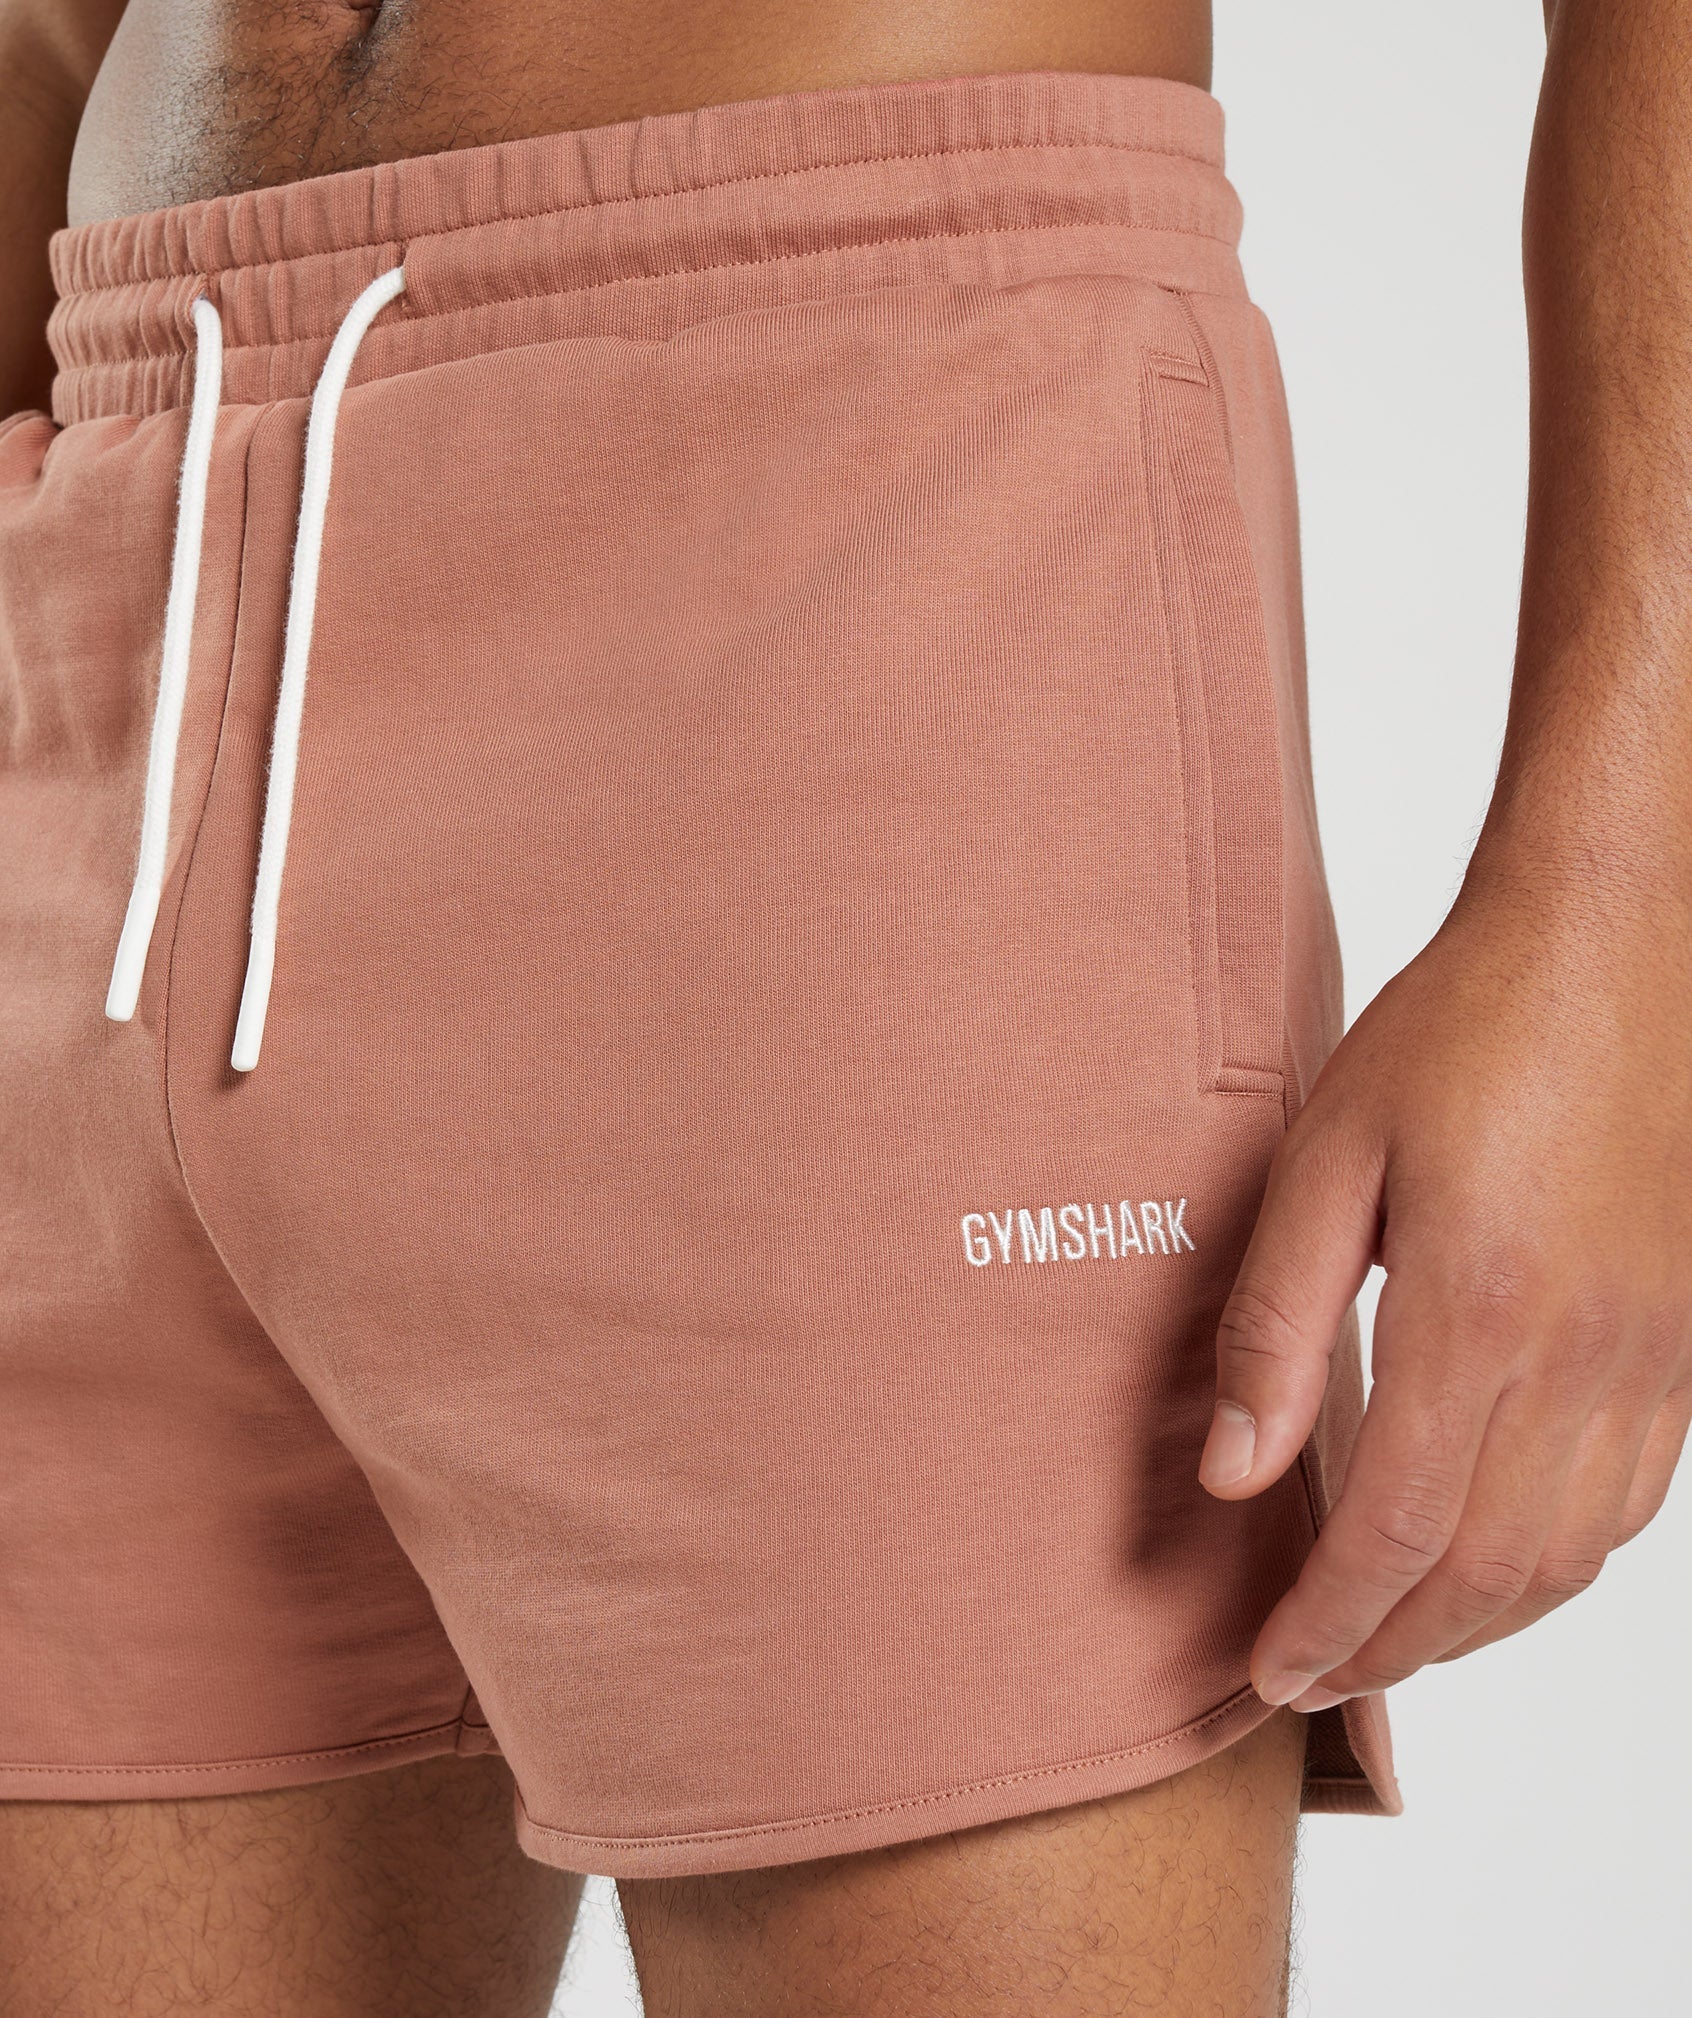 Rest Day Sweats 4'' Lounge Shorts in Toffee Brown - view 7